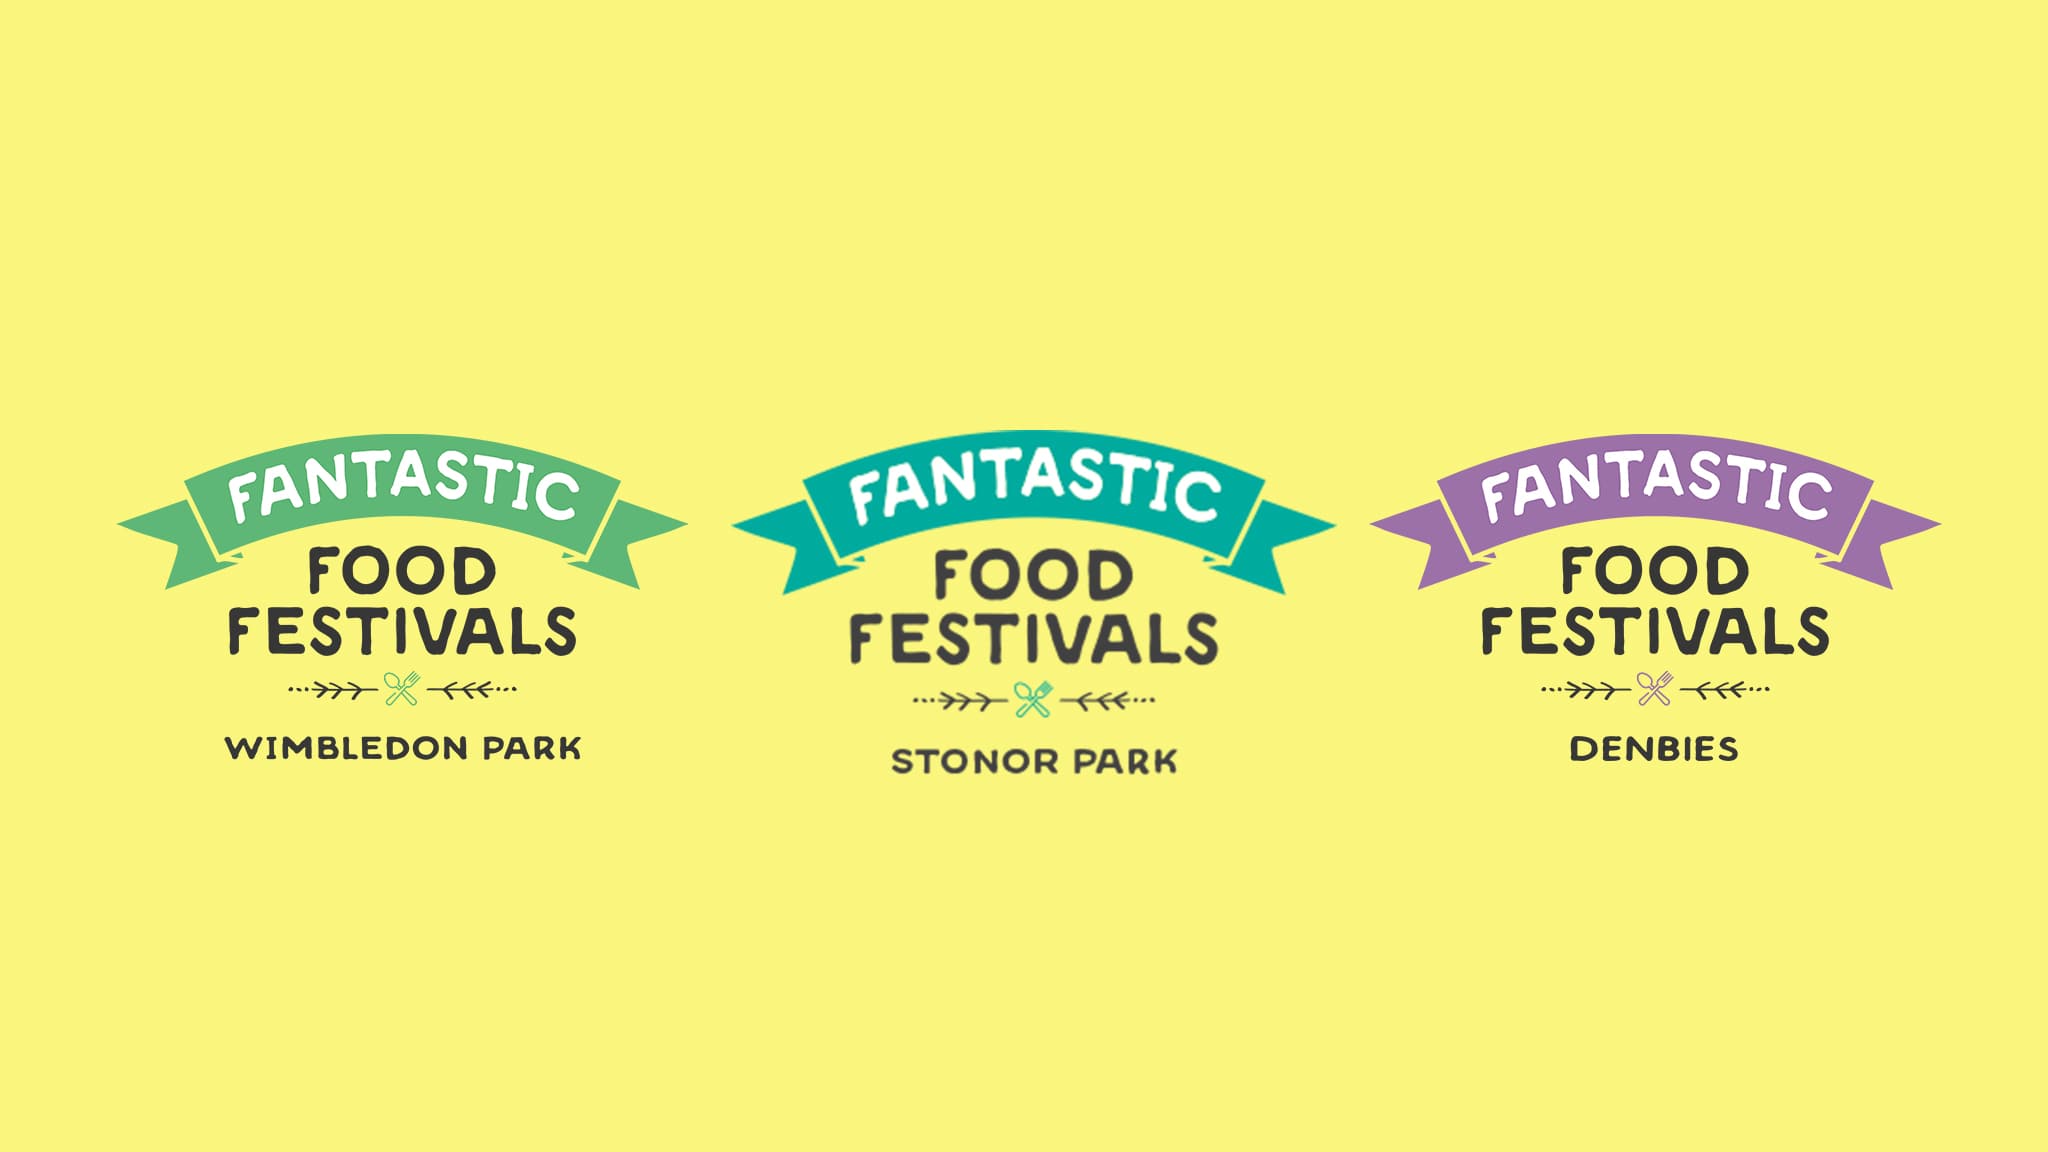 Food Festival Marketing Campaigns That Work